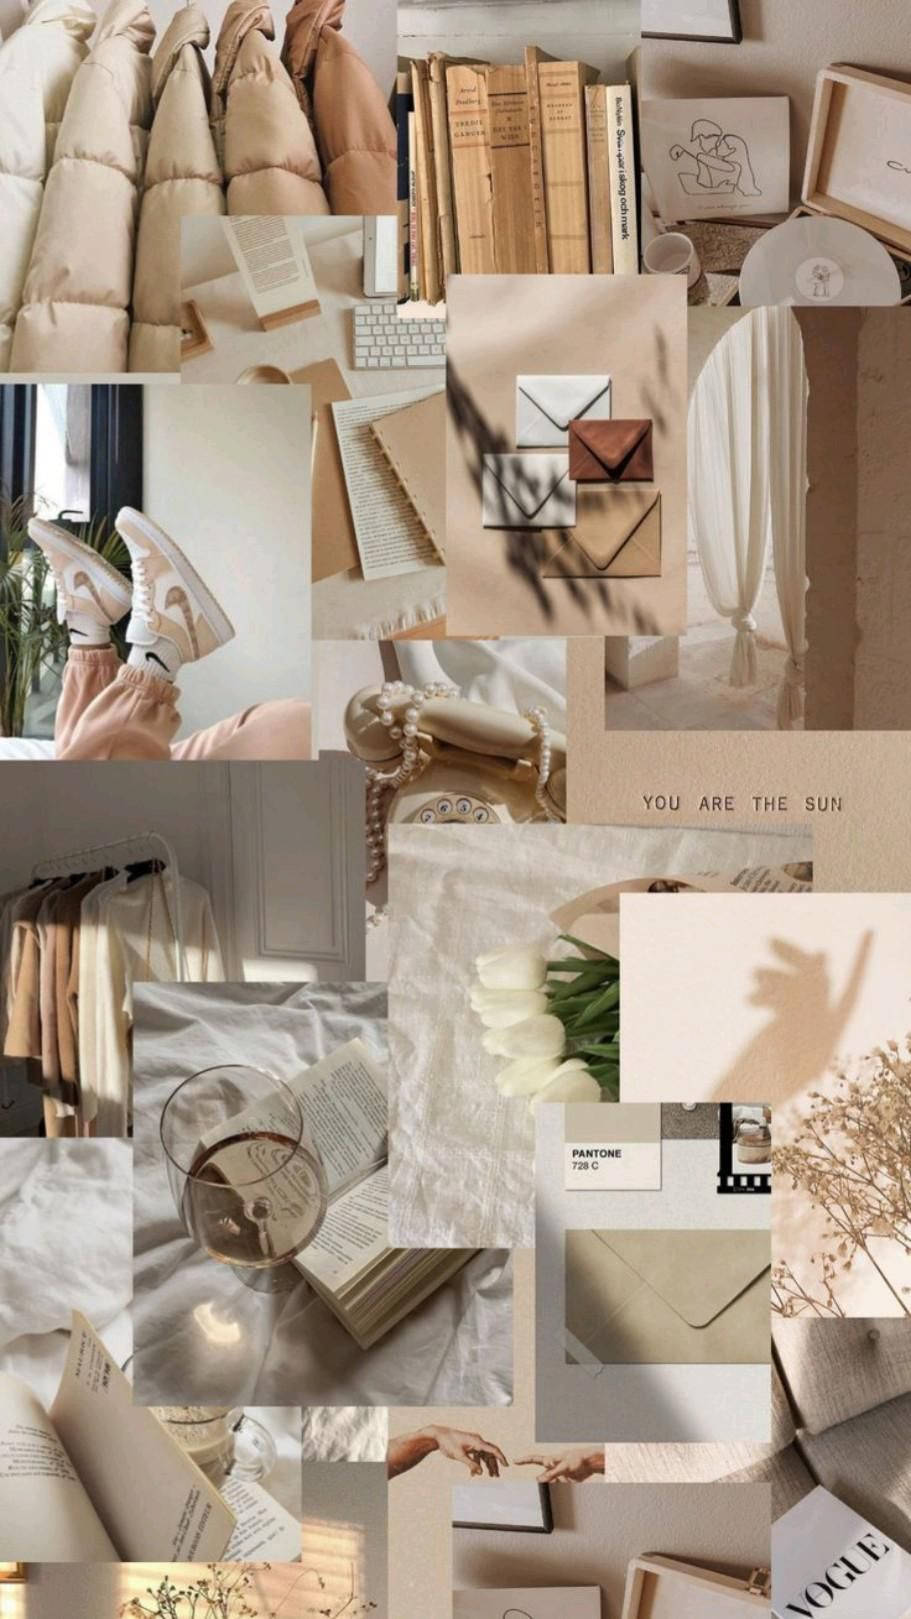 Download Cream Color That Girl Aesthetic Collage Wallpaper | Wallpapers.com